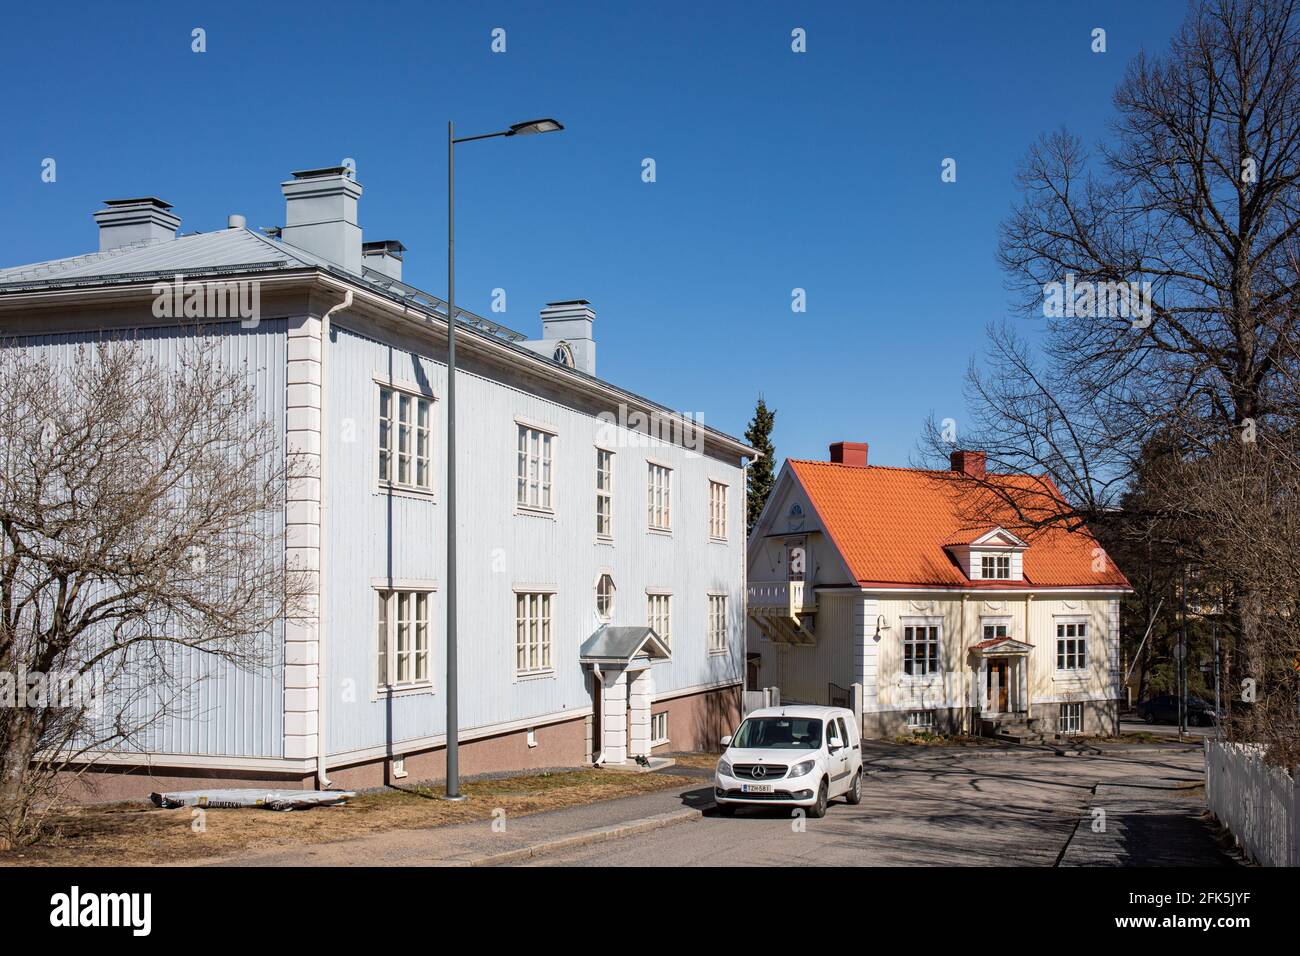 Traditional wooden houses in Pyynikki district of Tampere, Finland Stock Photo